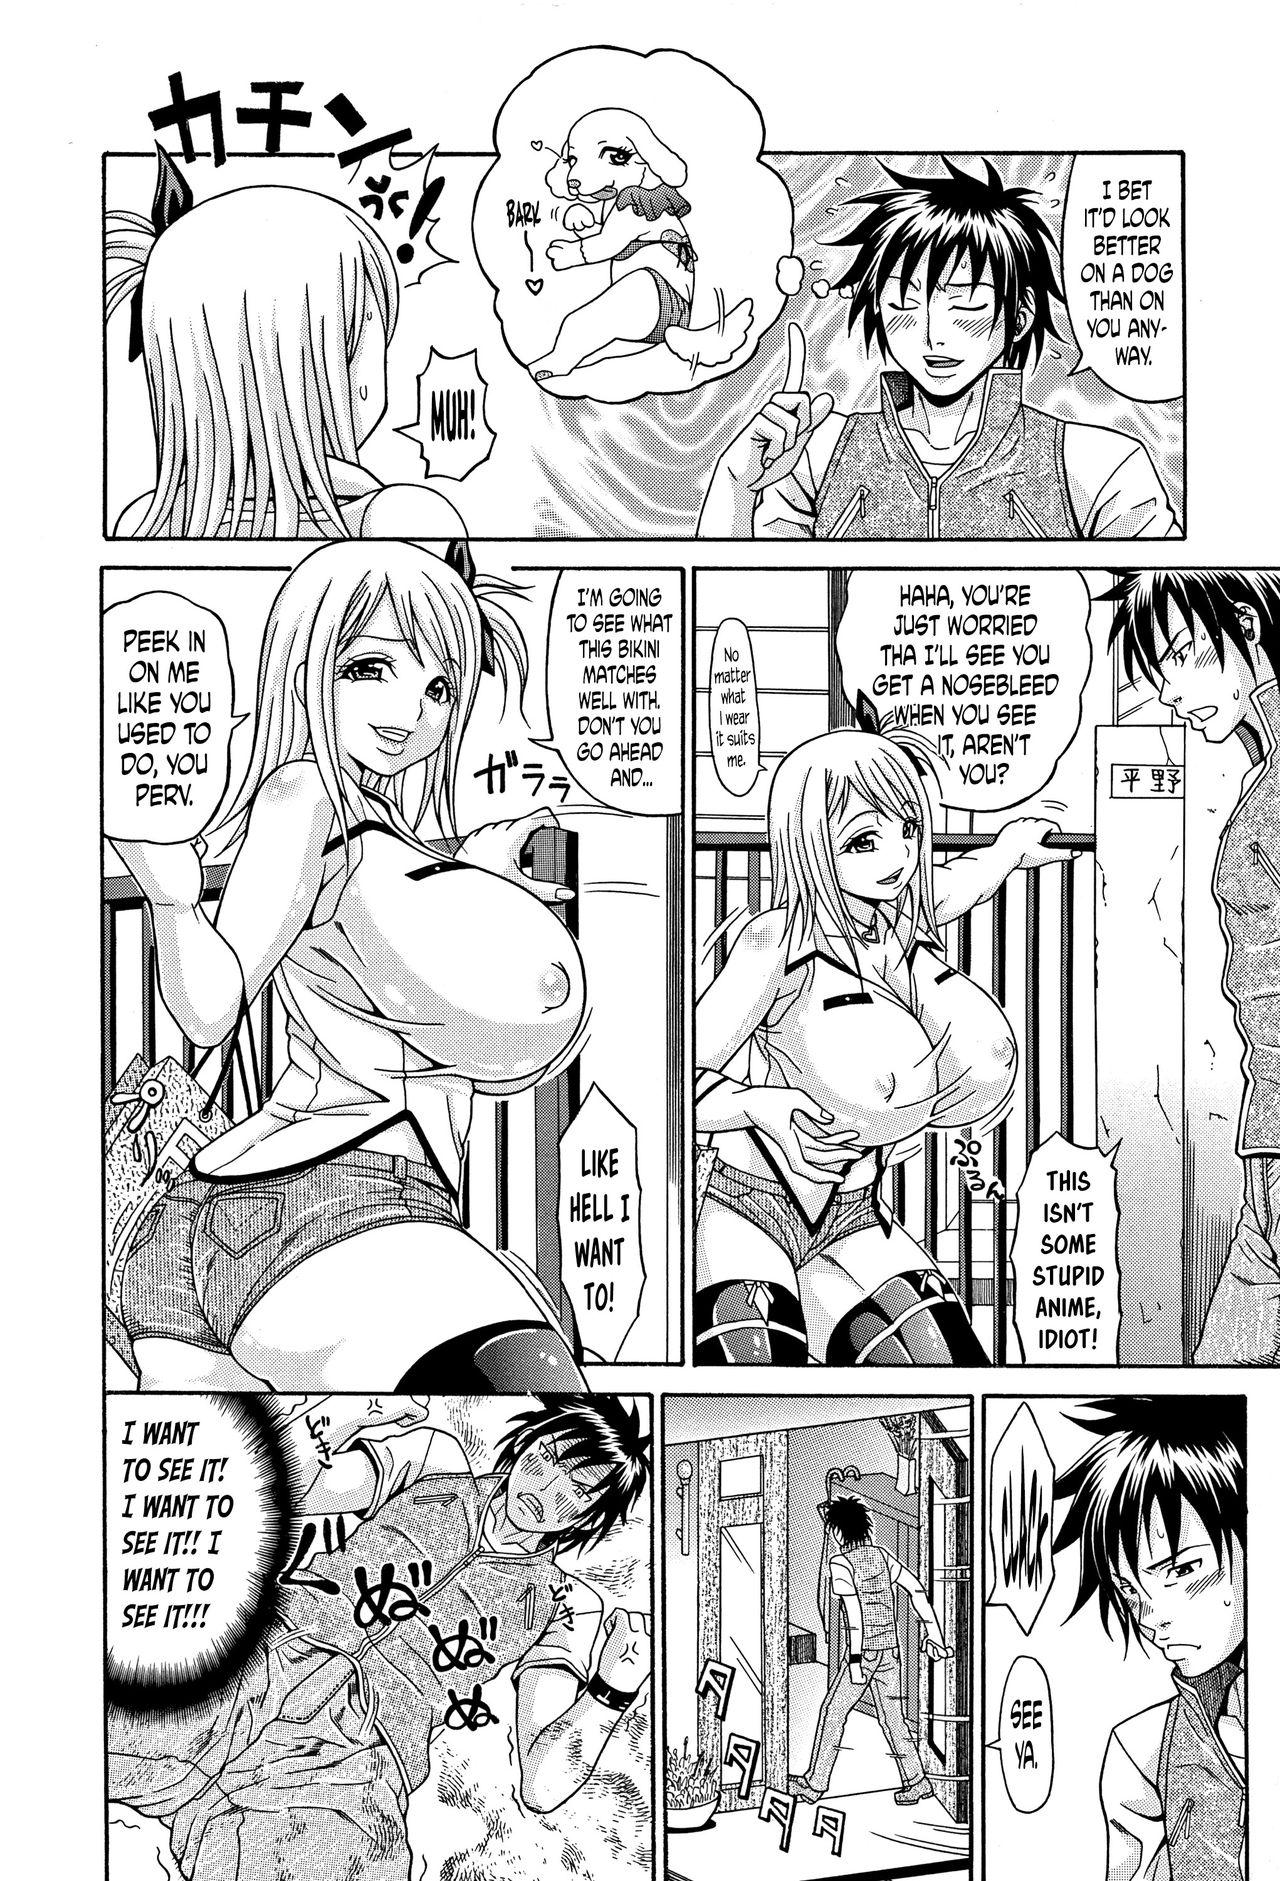 [Andou Hiroyuki] Mamire Chichi - Sticky Tits Feel Hot All Over. Ch.1-6 [English] [doujin-moe.us] 39